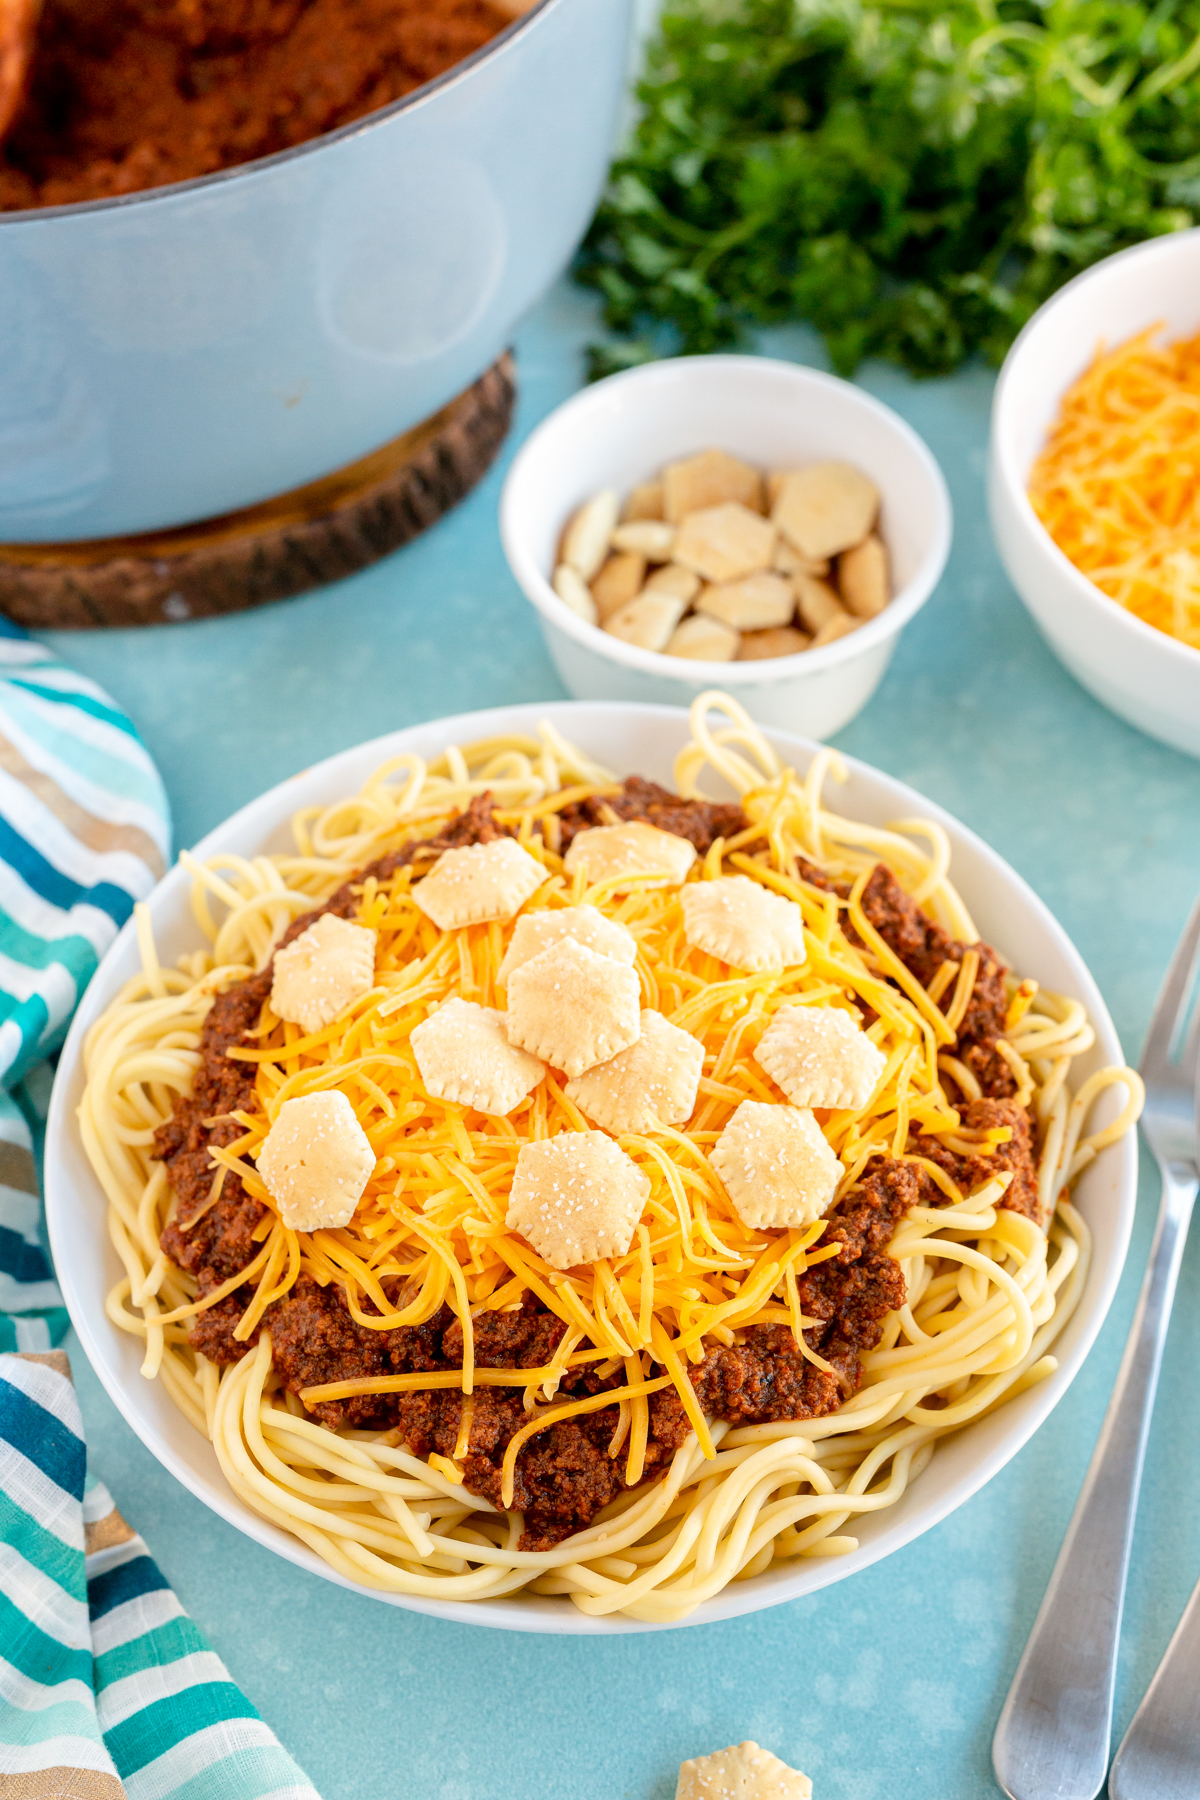 Cincinnati chili 3-way with oyster crackers on top